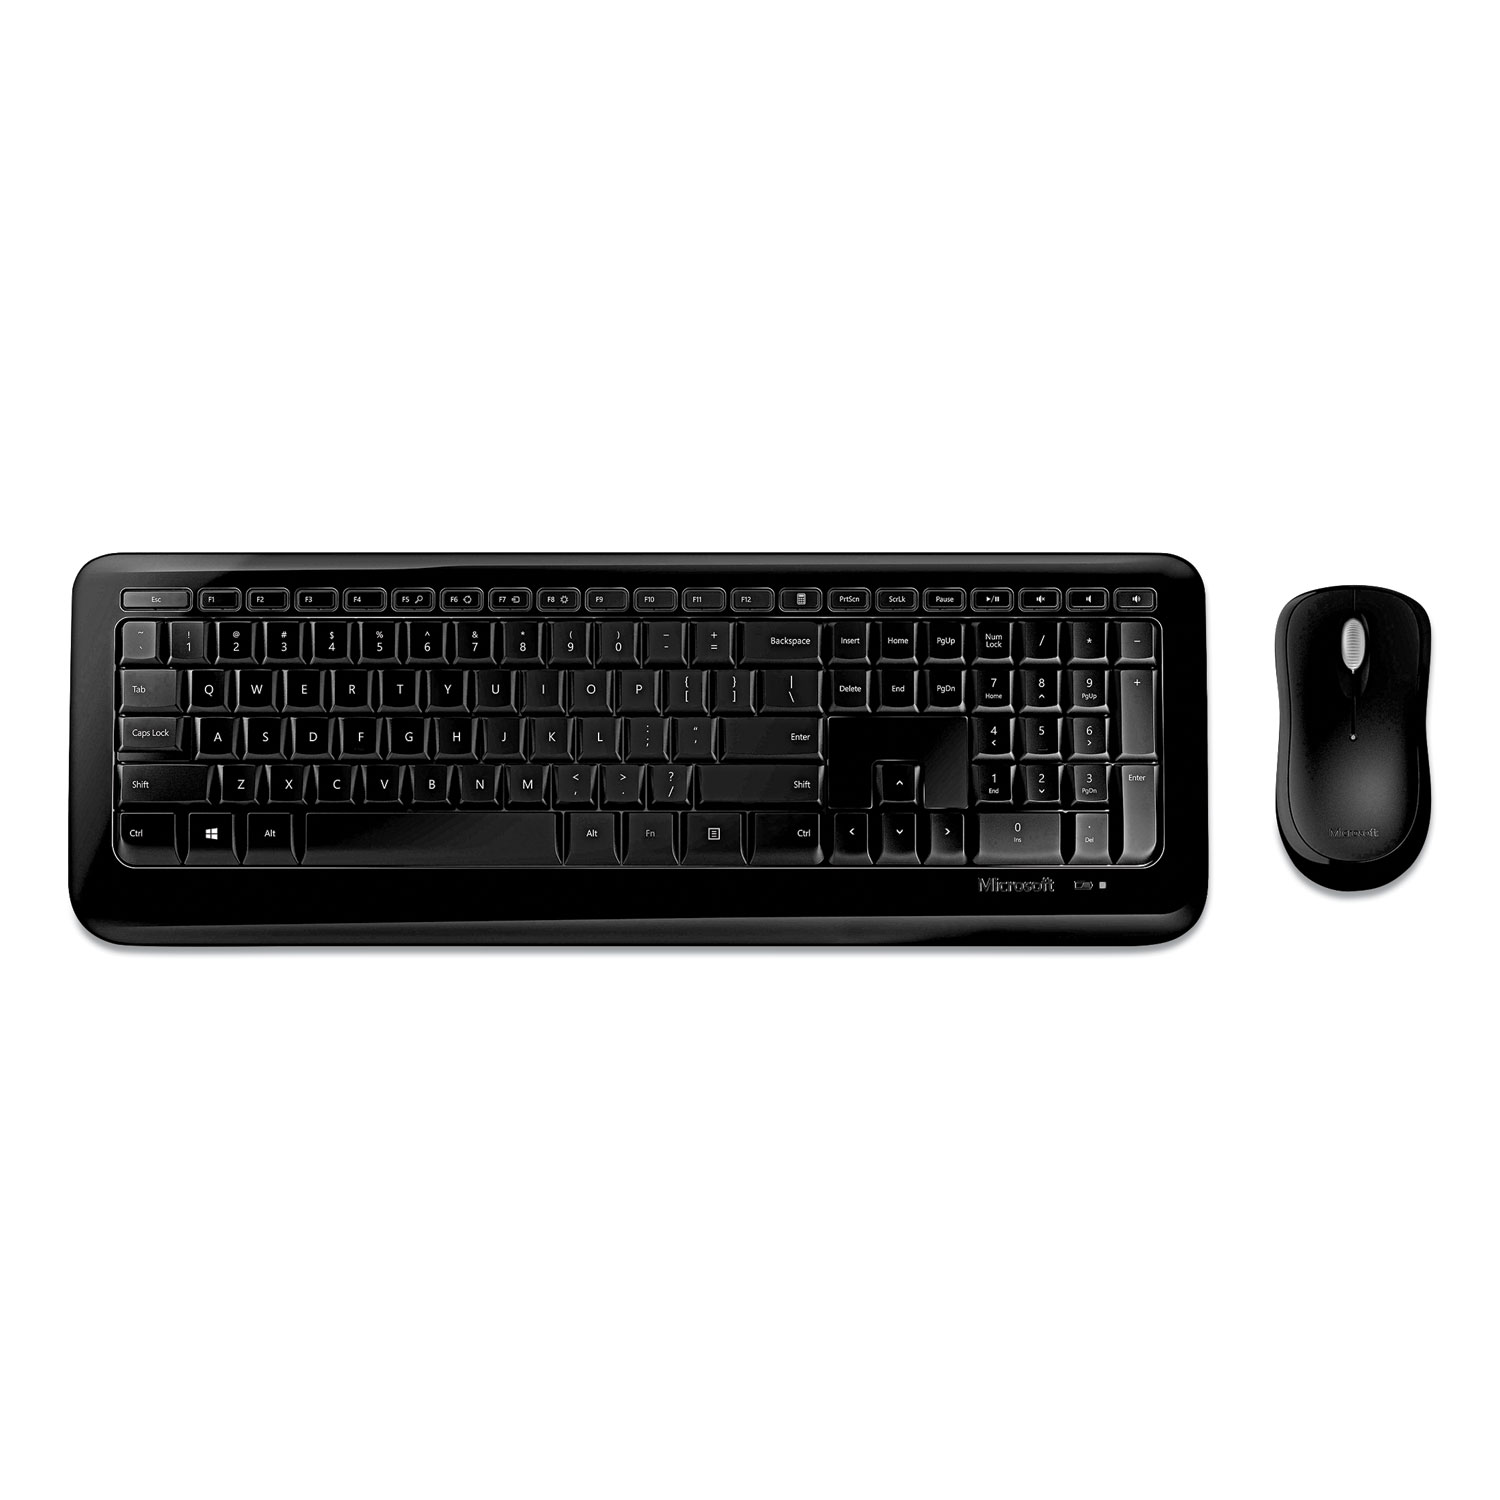  Microsoft PY9-00001 Desktop 850 Wireless Keyboard and Mouse Combo, 2.4 GHz Frequency, Black (MSF1749490) 